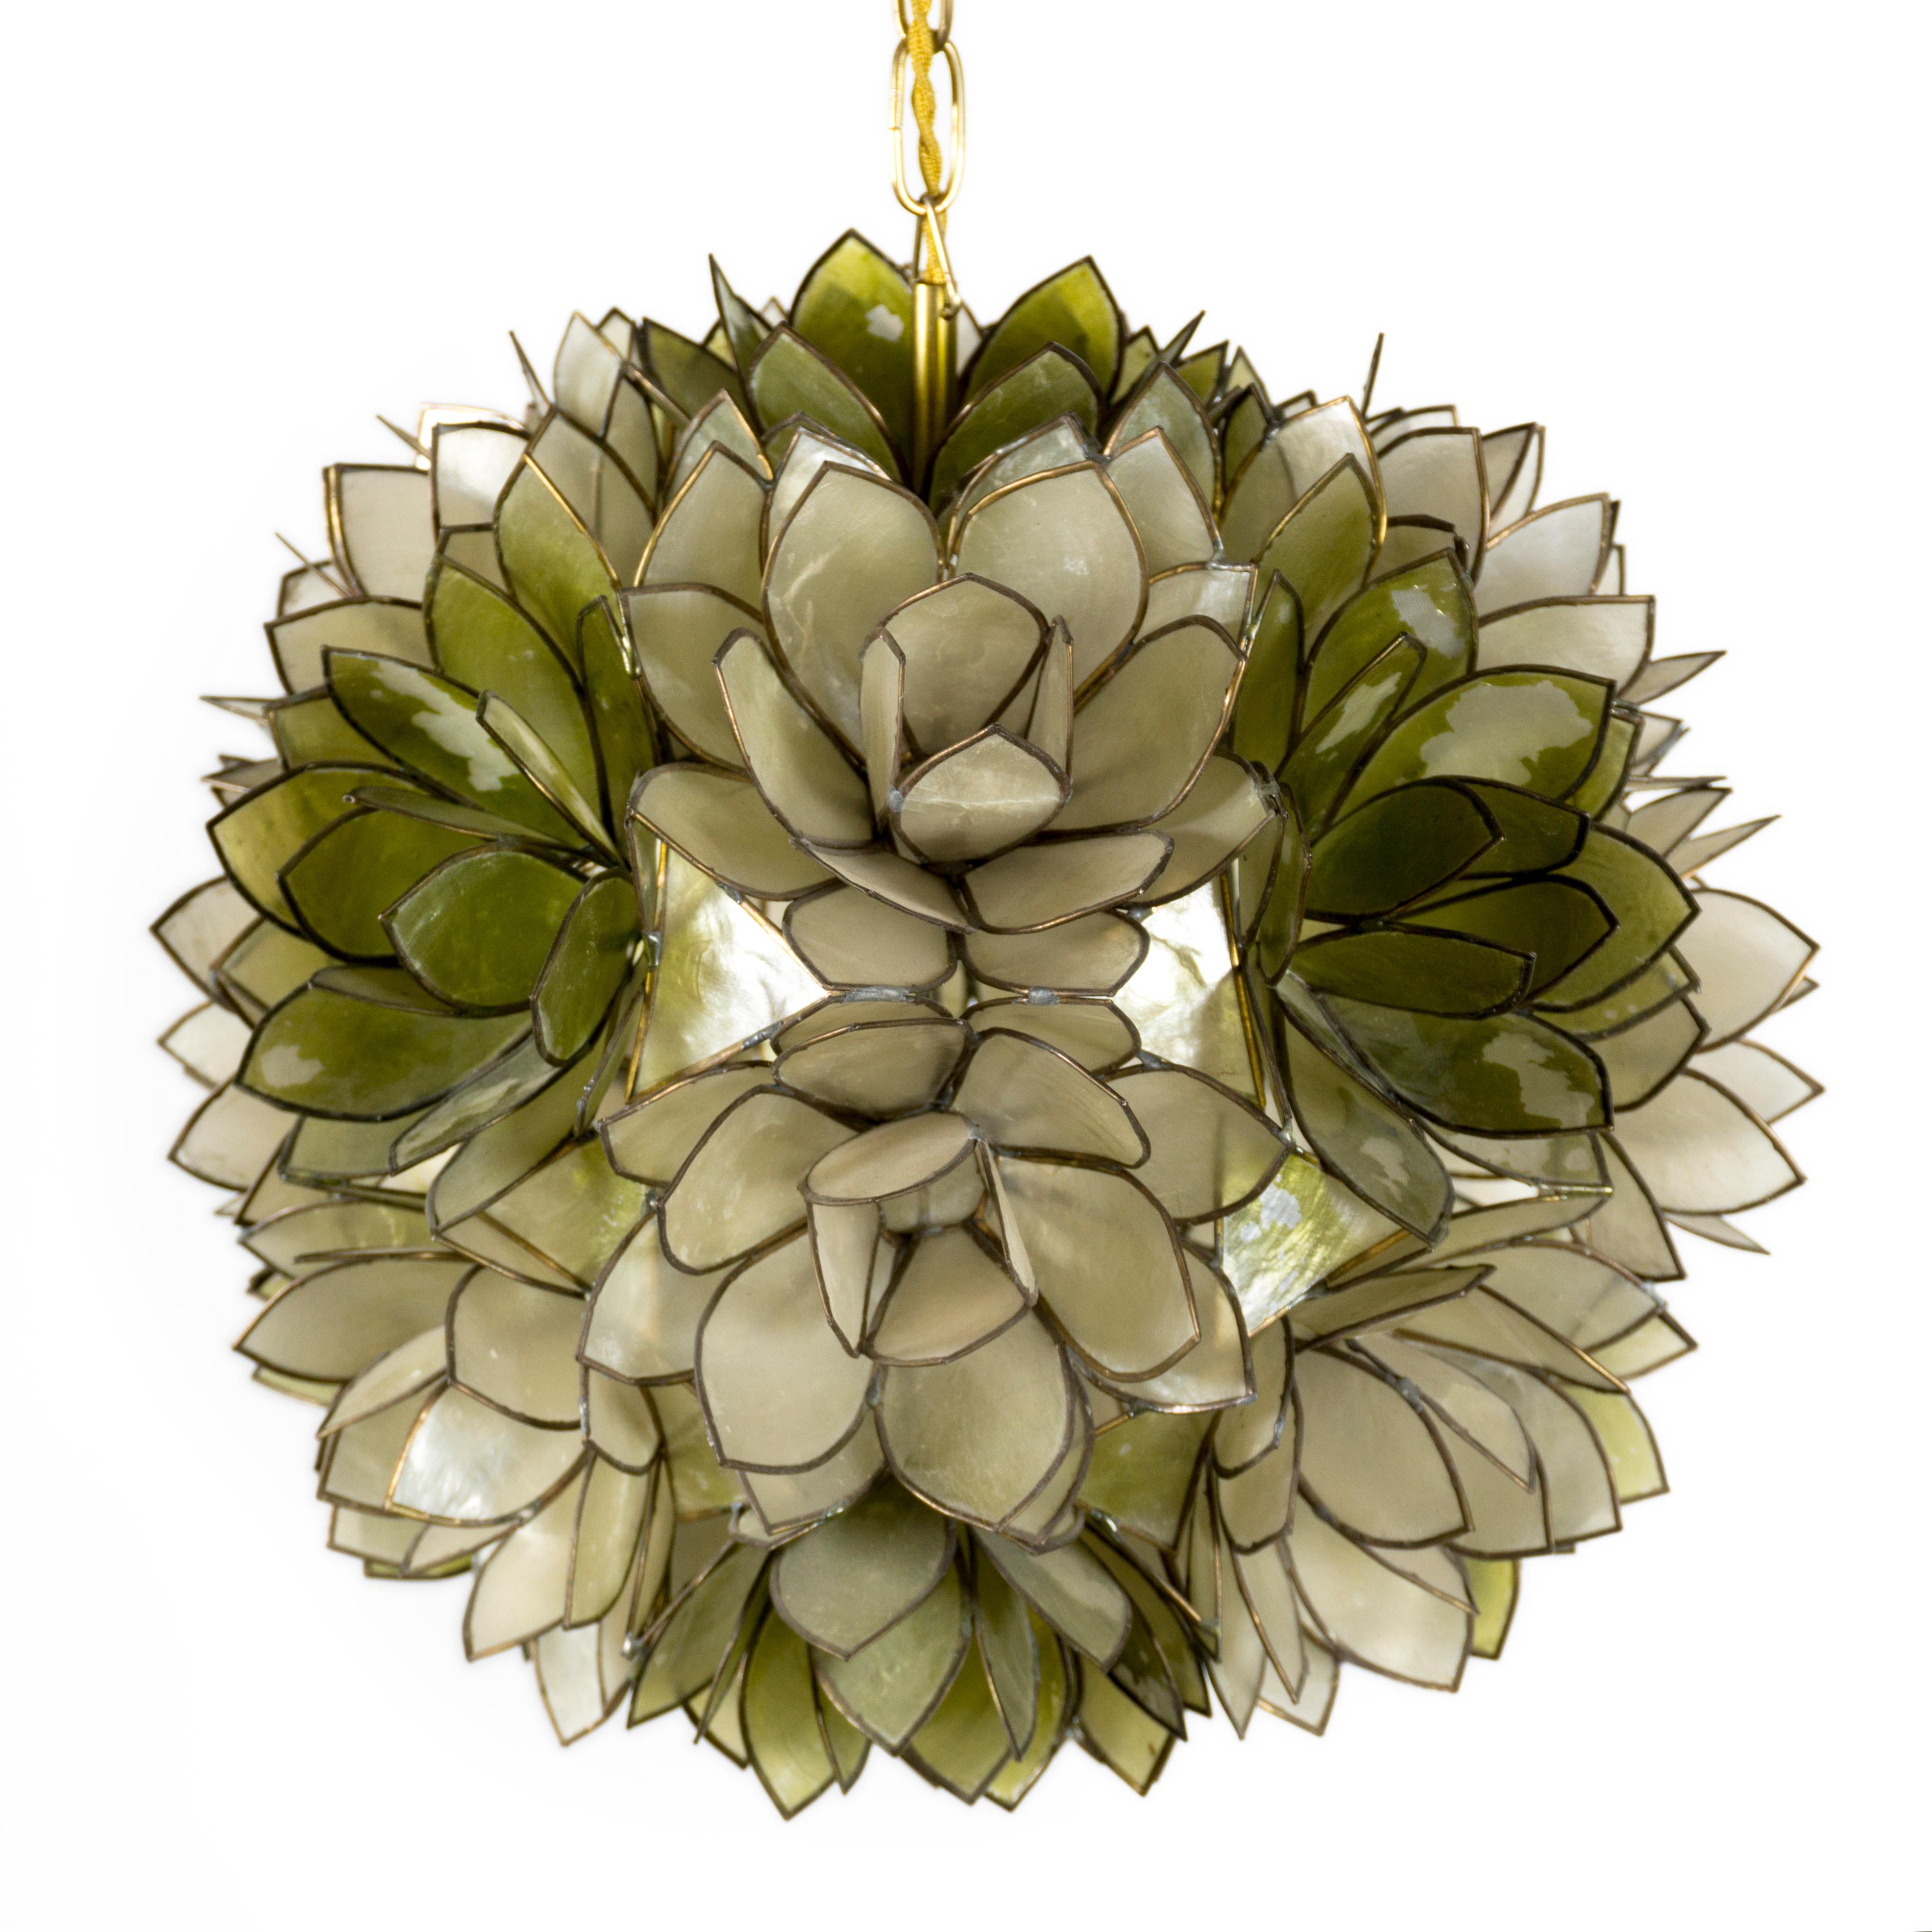 Very decorative, sculptural mother-of-pearl pendant lamp from the 1970s. The floral, spherical pendant lamp consists of many groupings of thin mother-of-pearl leaves individually framed in metal. The Lamps is complemented by its beautiful brass